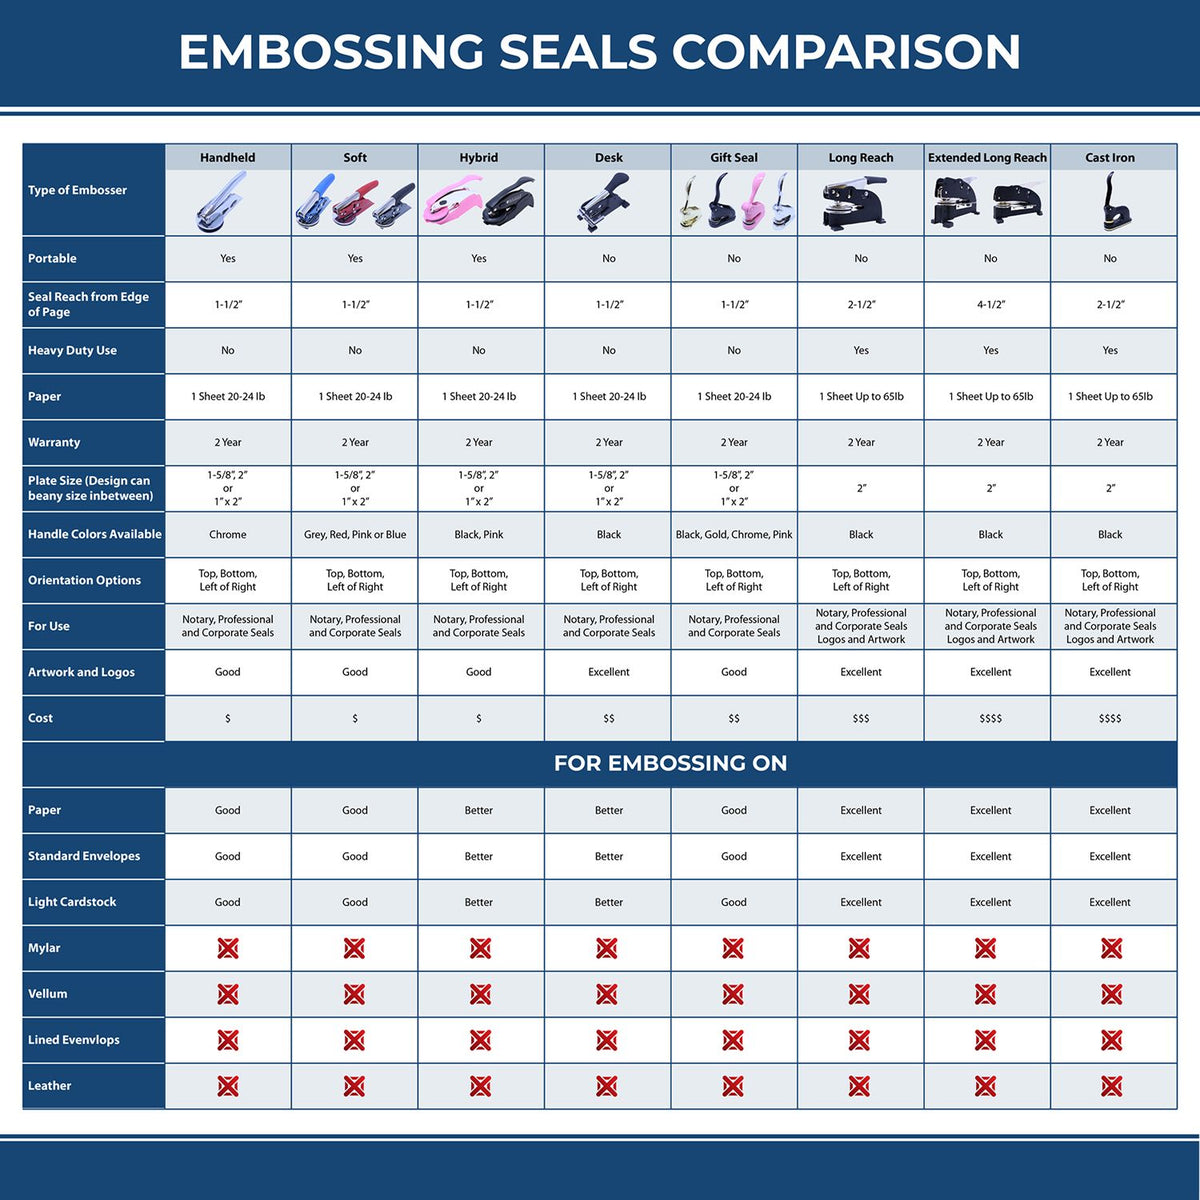 A comparison chart for the different types of mount models available for the Hybrid New Mexico Land Surveyor Seal